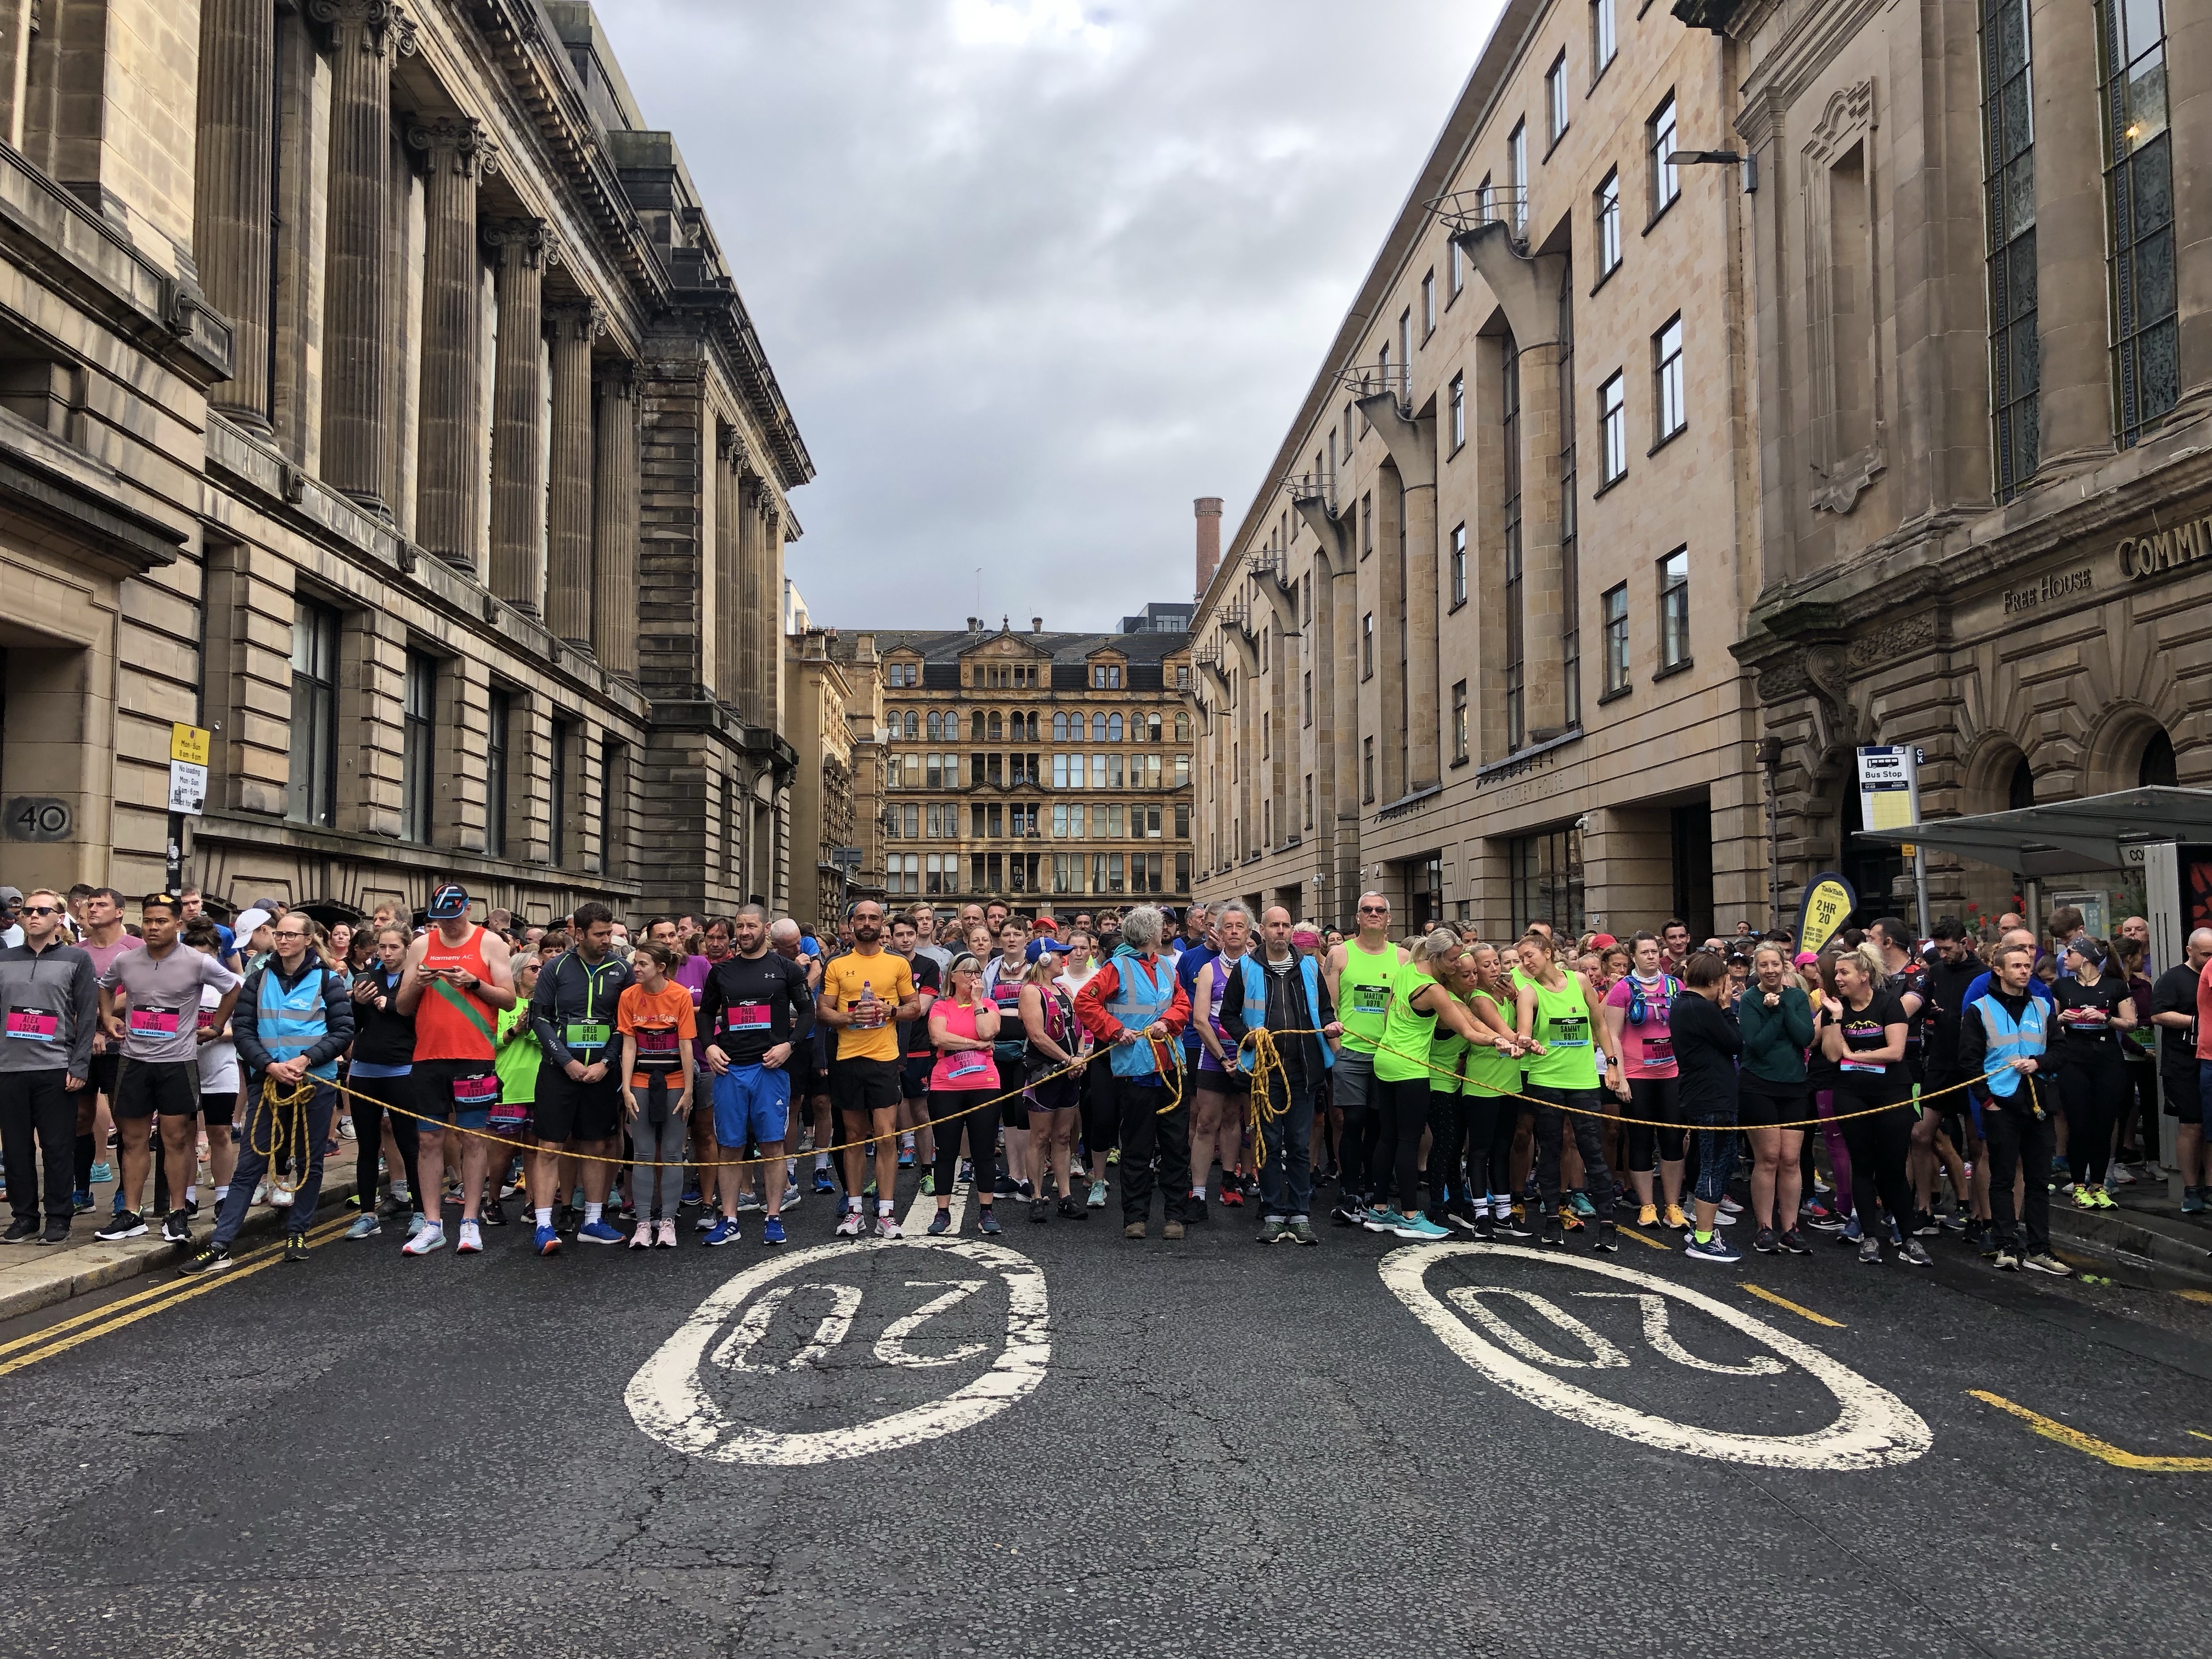 Runners standing behind a starting line on the streets in Glasgow.